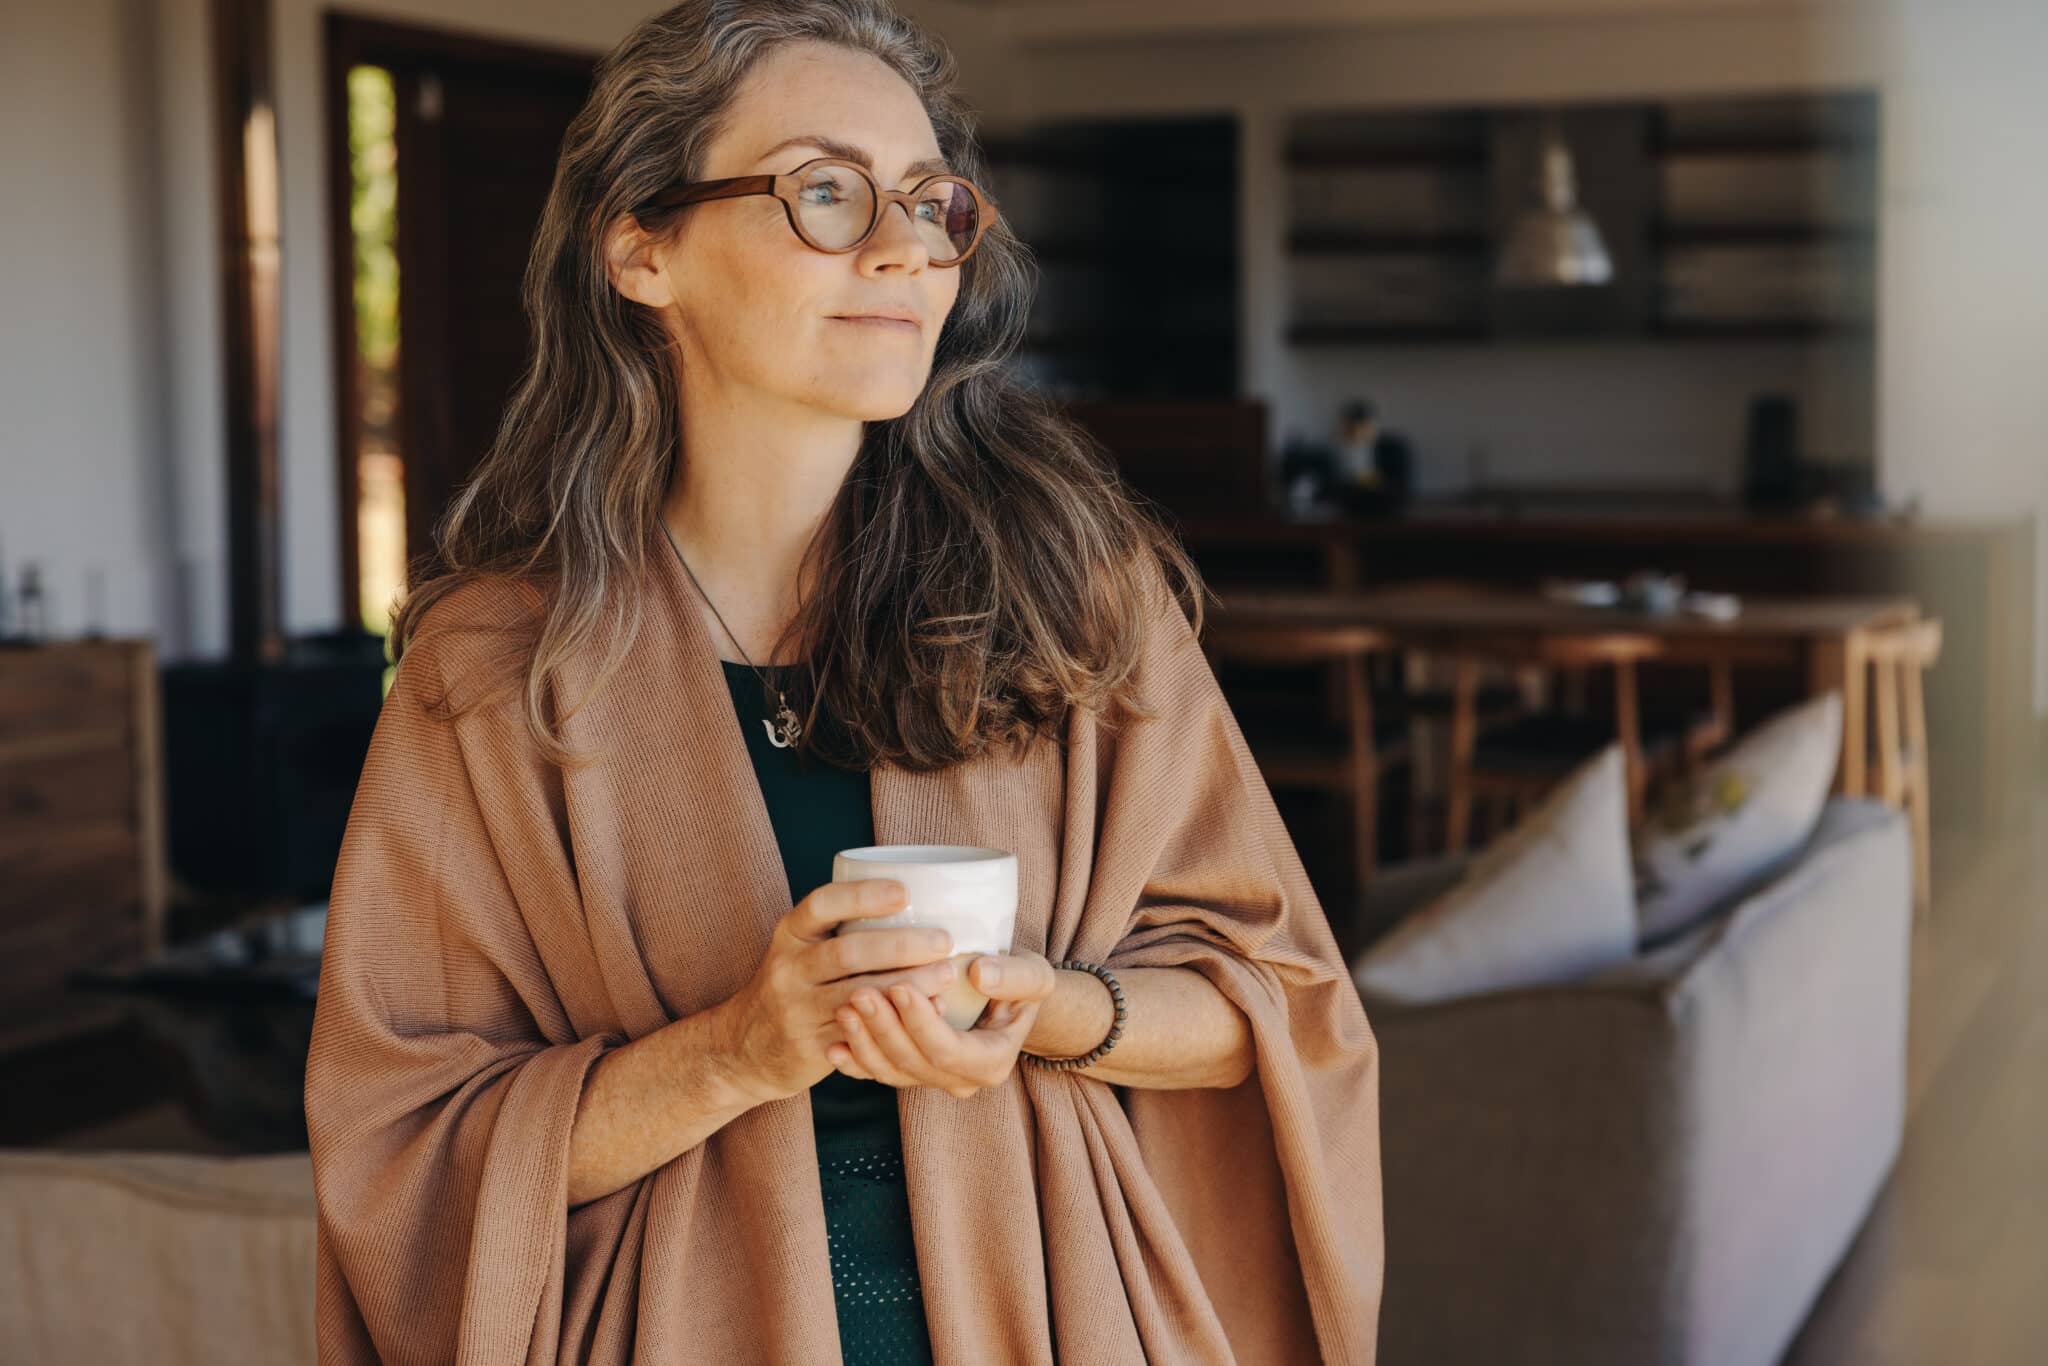 The best self-care tips specifically for doctors. Learn how to prioritize your well-being, achieve work-life balance, and enhance your health and happiness.